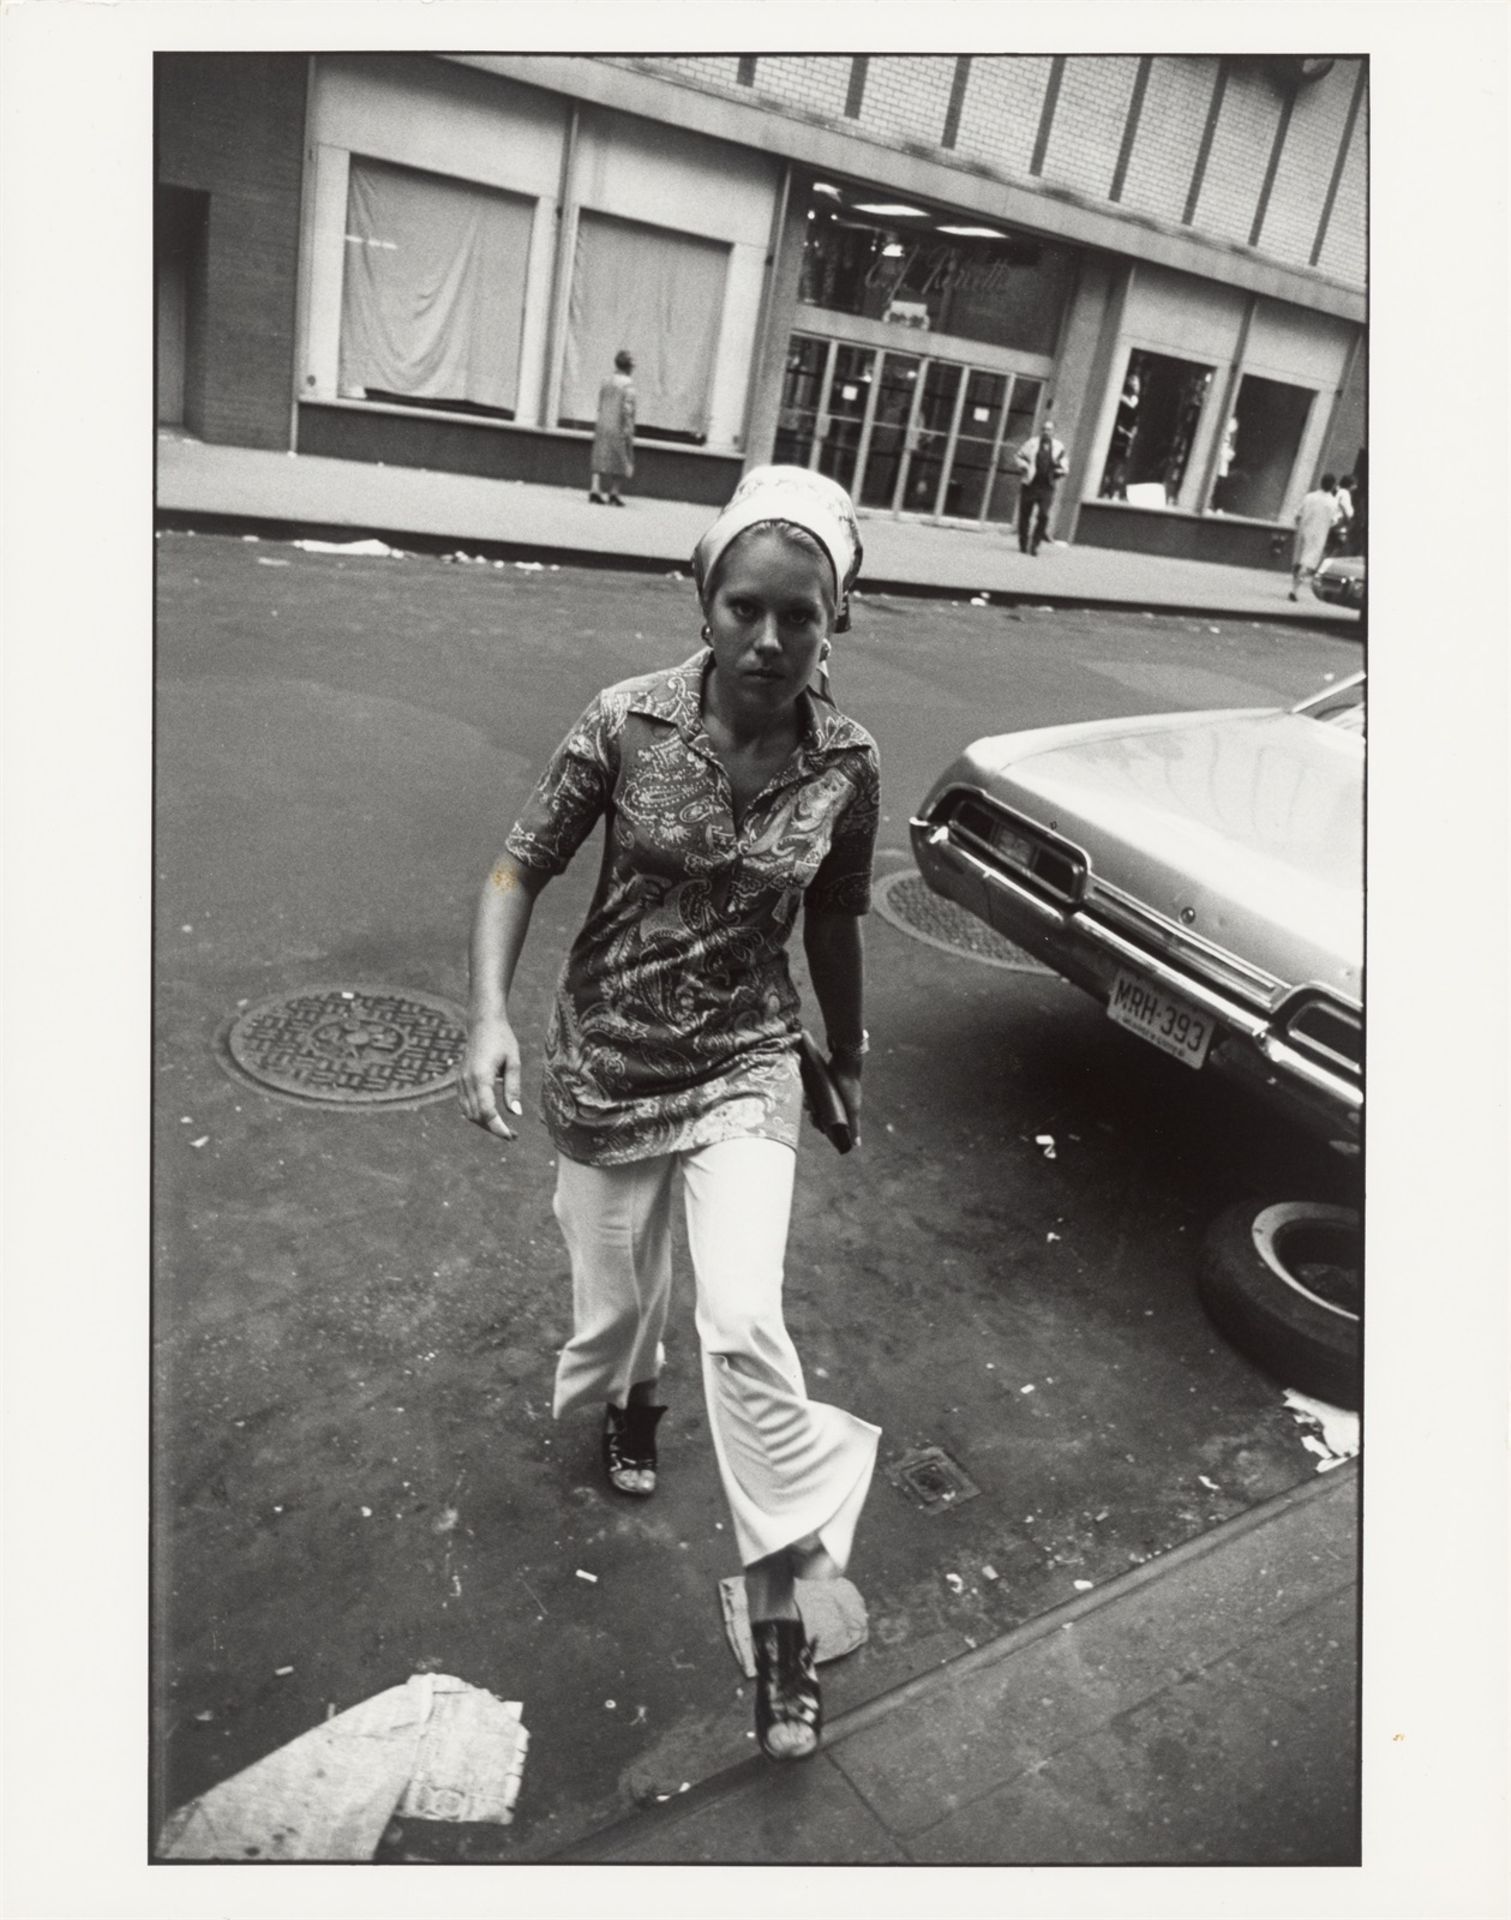 Garry Winogrand. New York, from the series ”Women are Beautiful”, 1960–1975. - Image 2 of 2